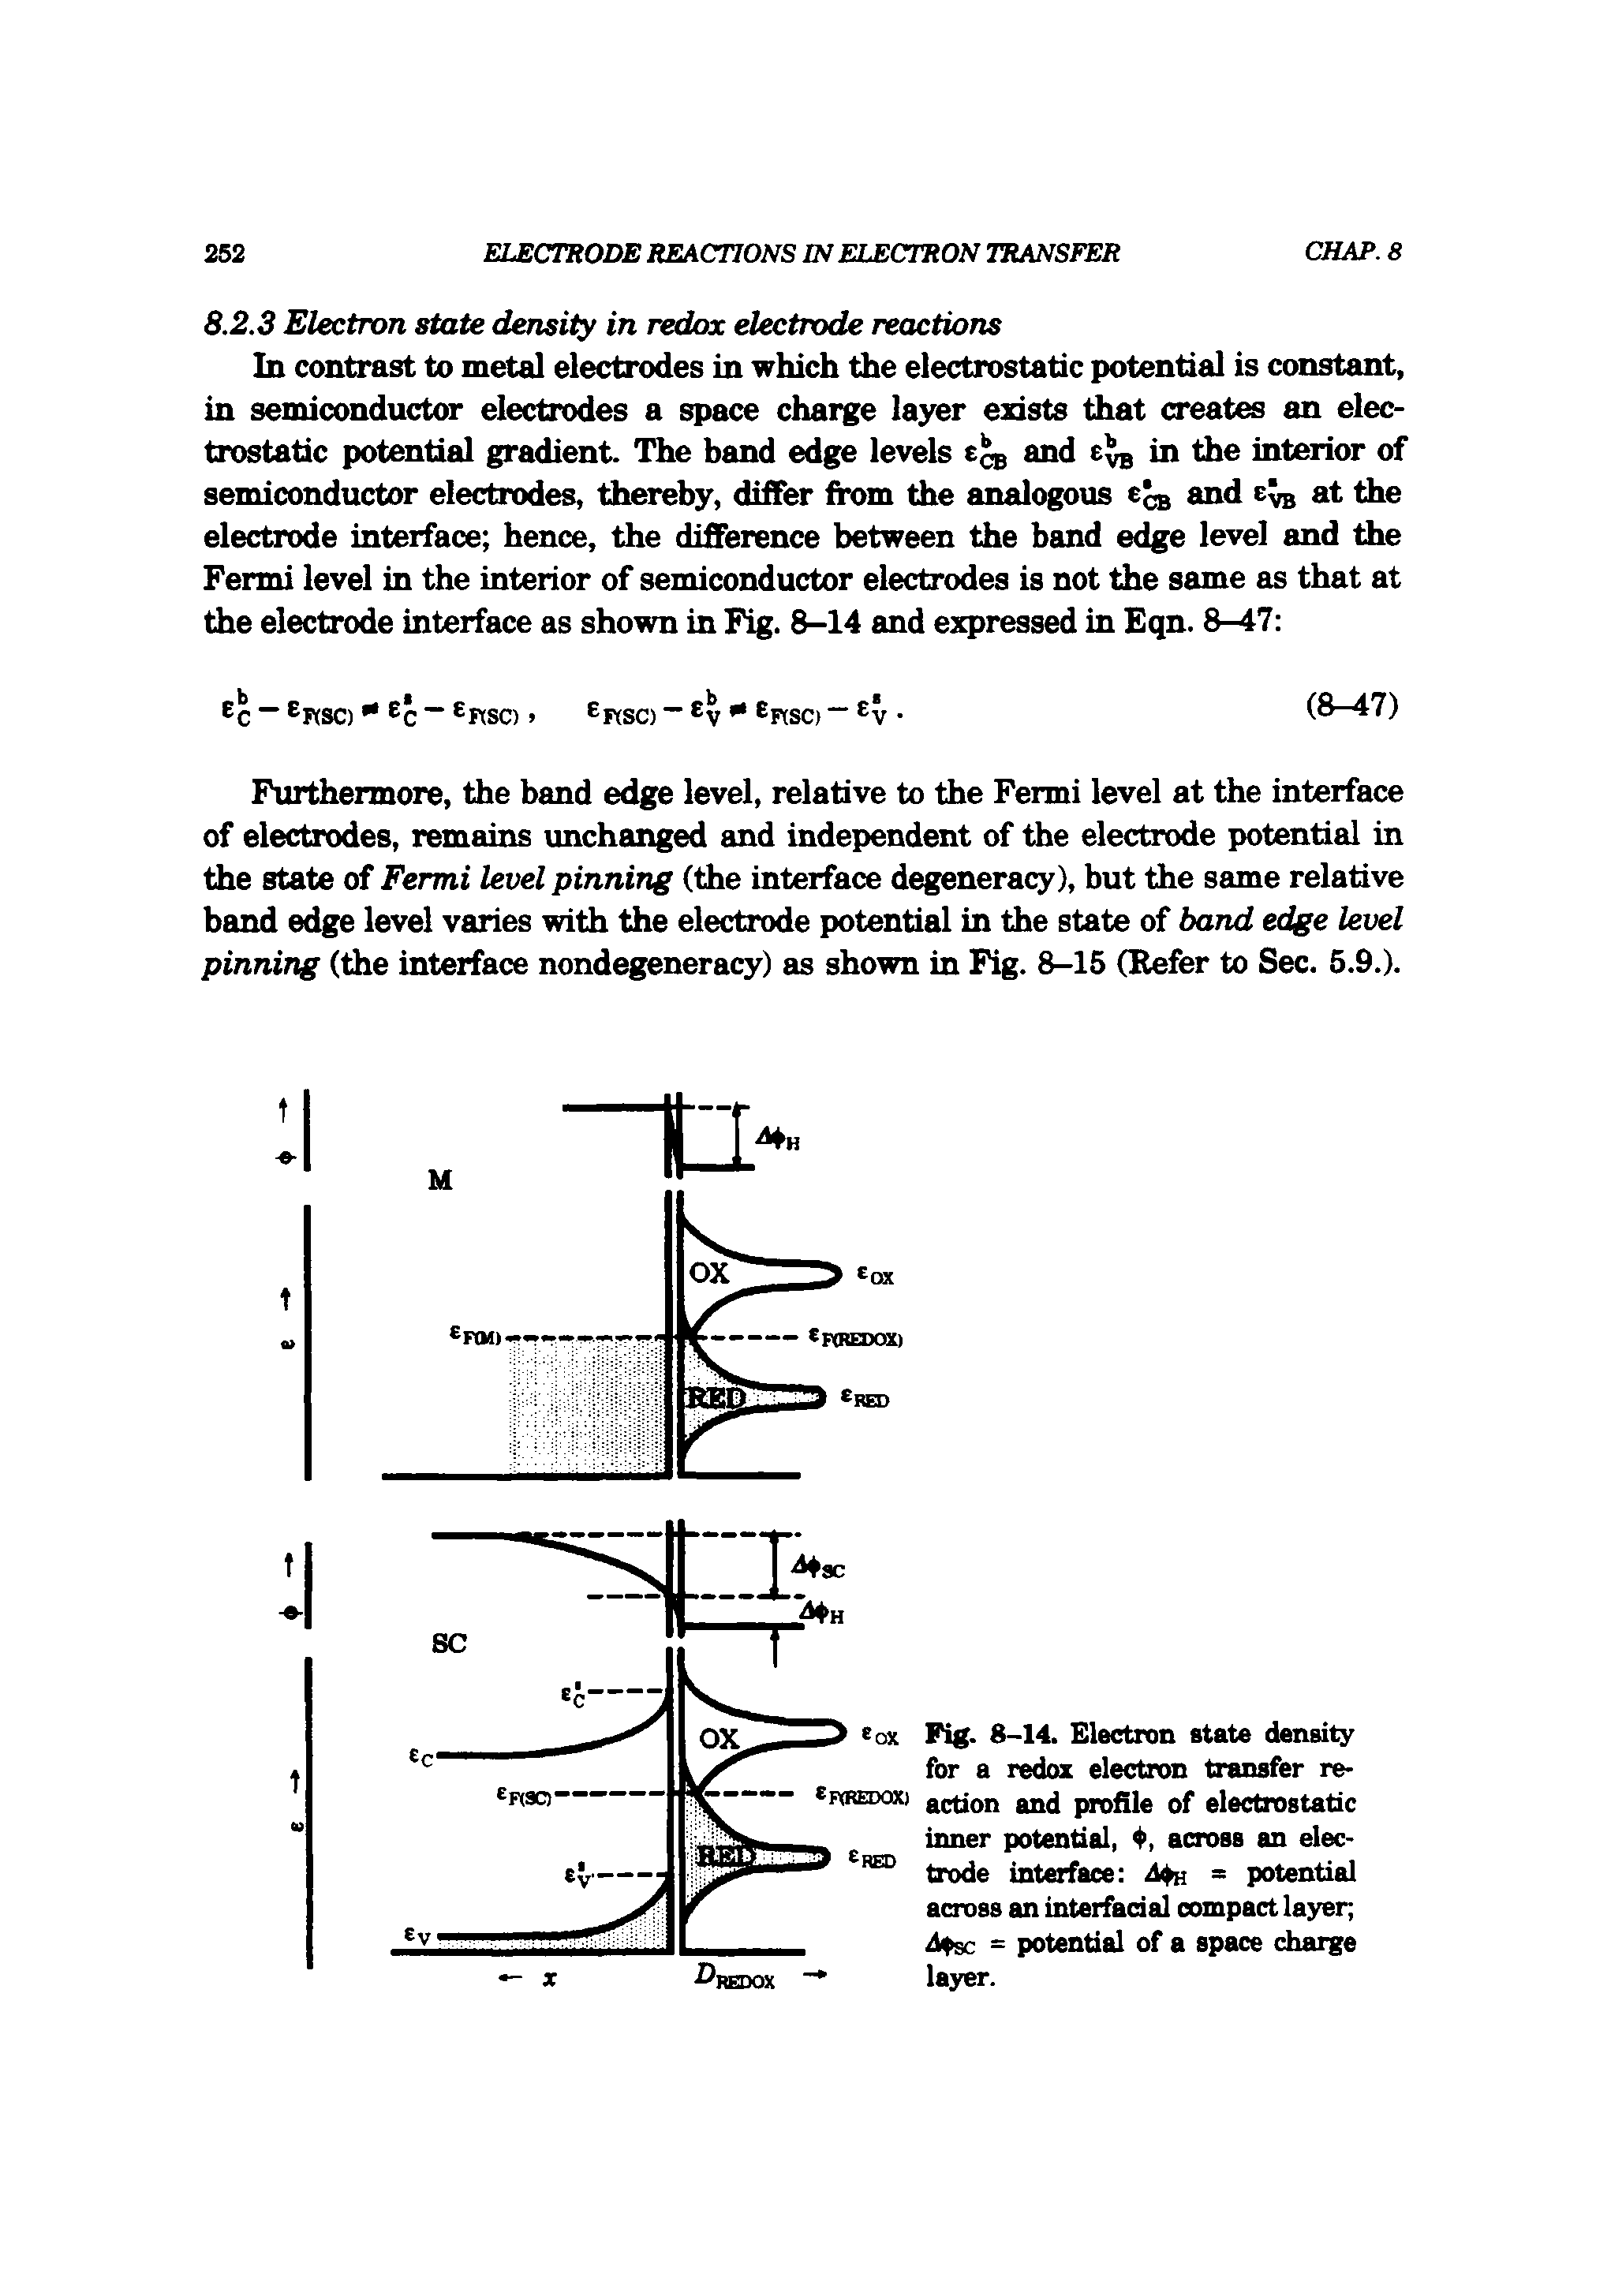 Fig. 8-14. Electron state density for a redox electron transfer reaction and profile of electrostatic inner potential, across an electrode interface = potential...